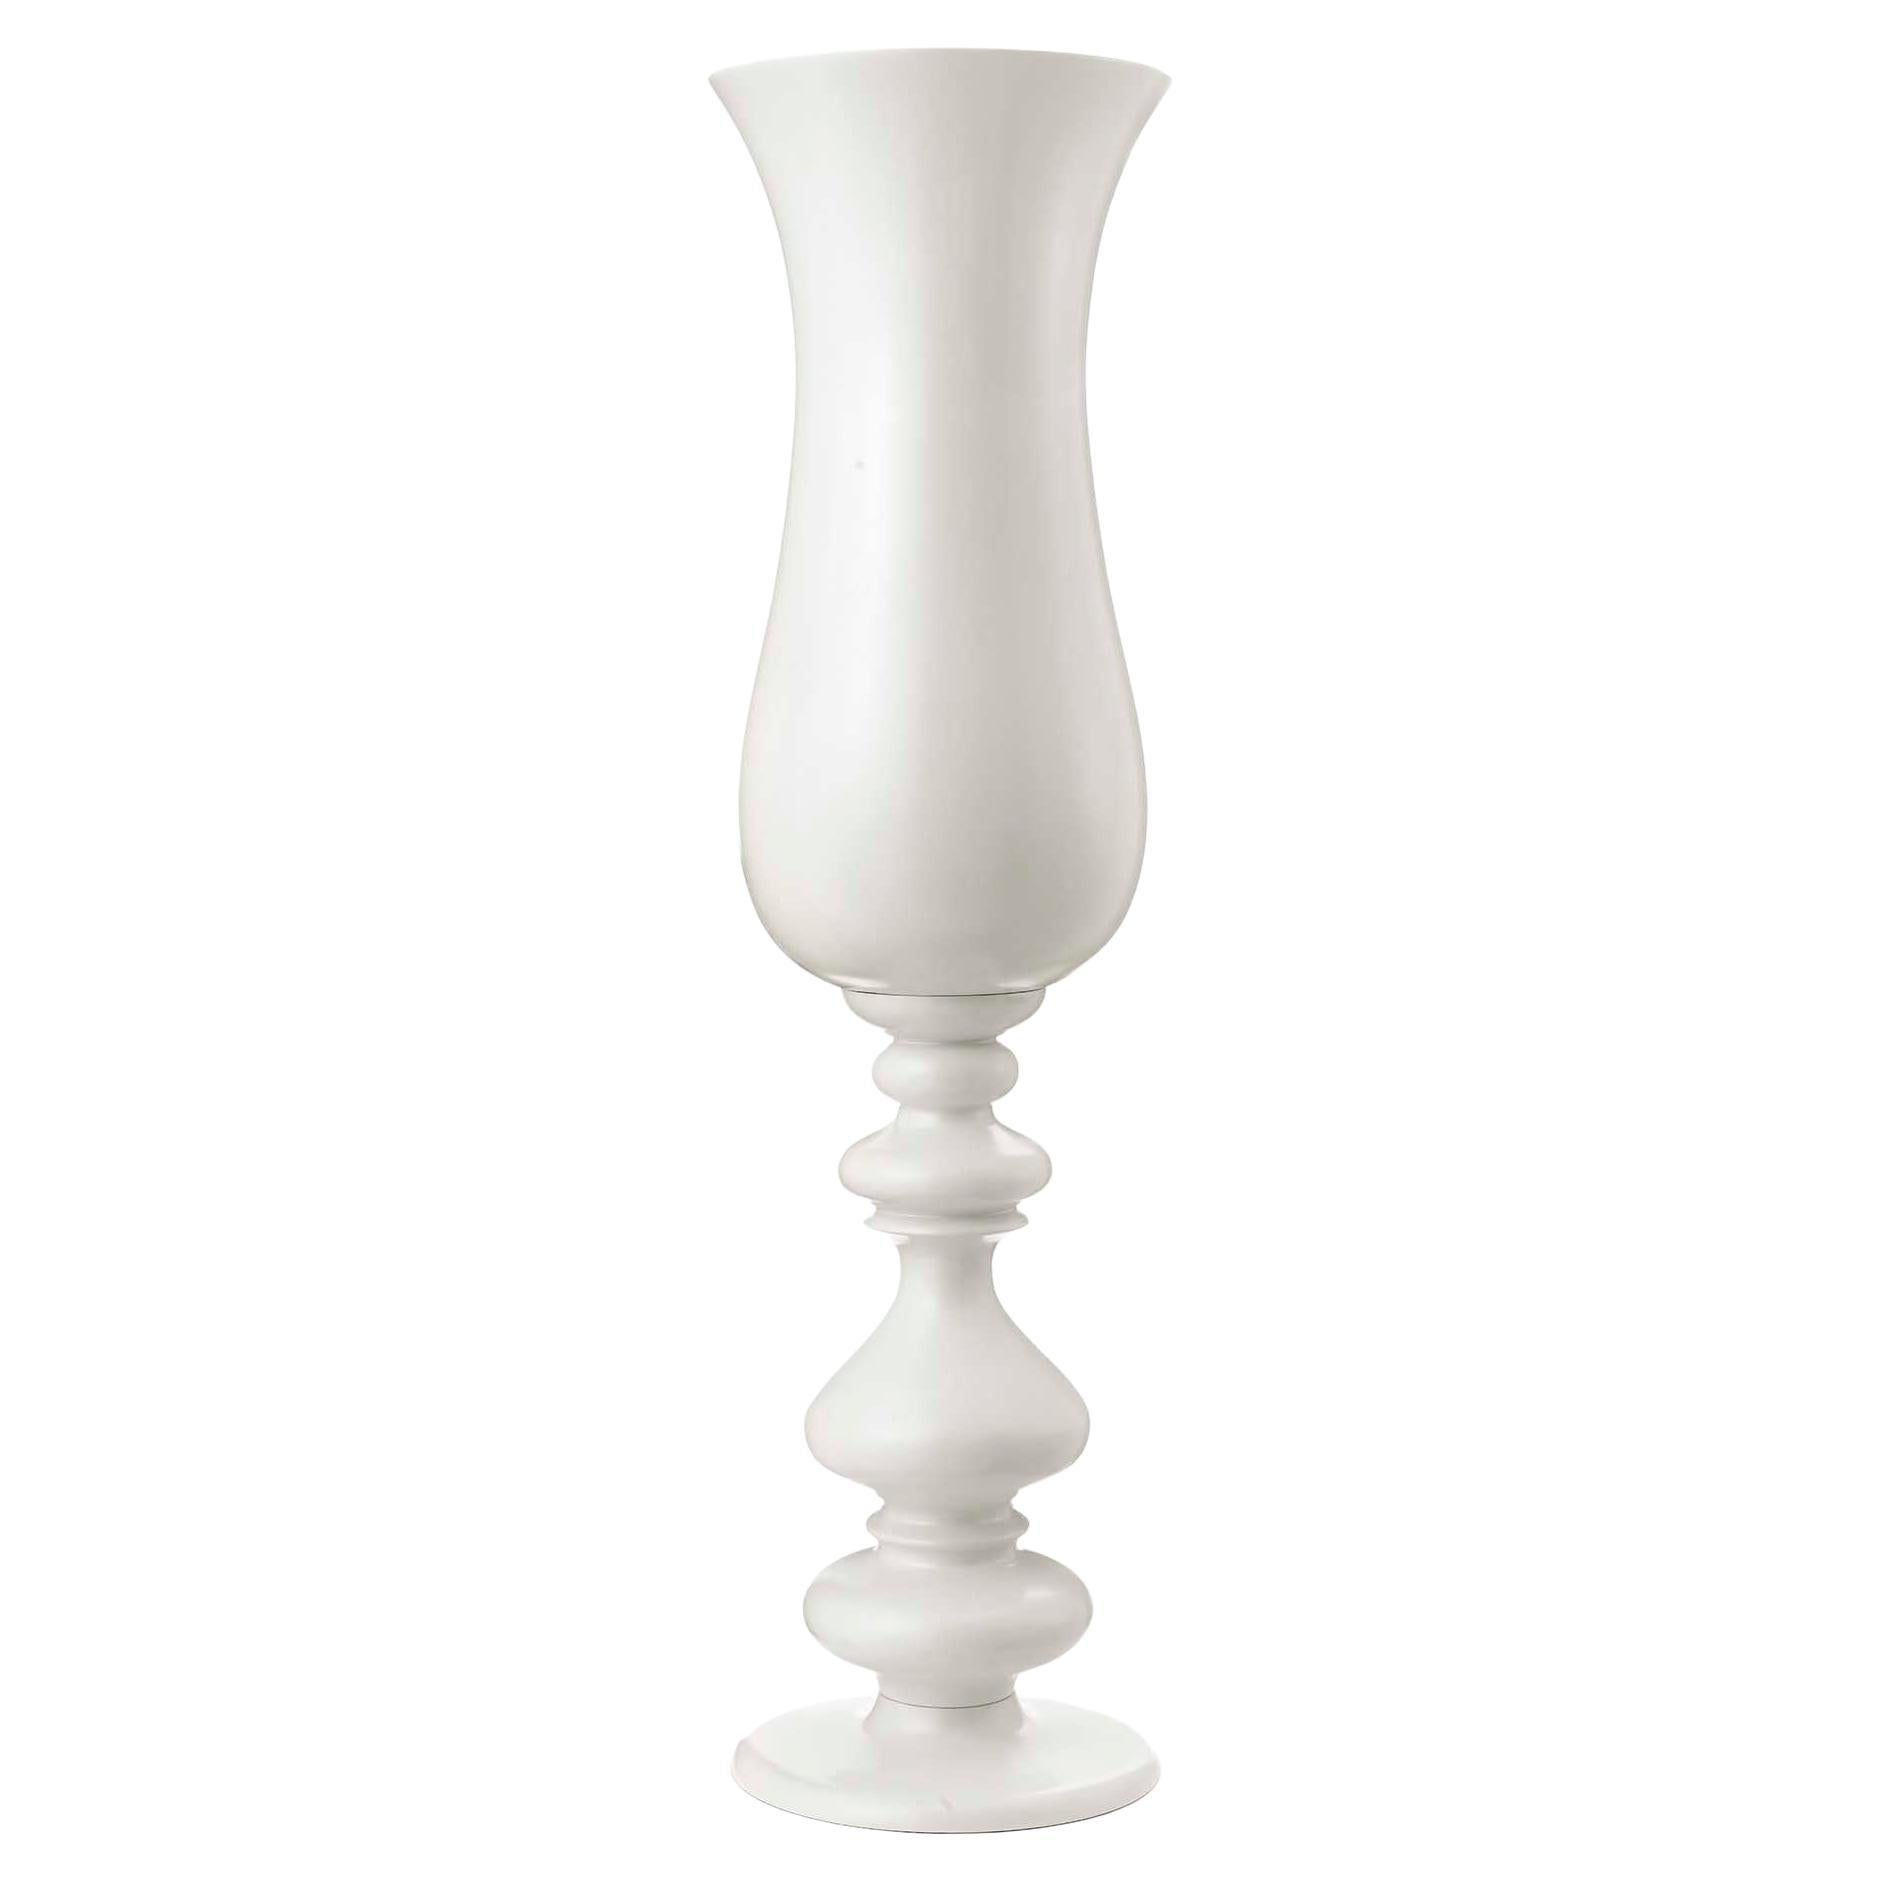 Ceramic Vase "Louis" White Matte Glazed by Gabriella B. Made in Italy For  Sale at 1stDibs